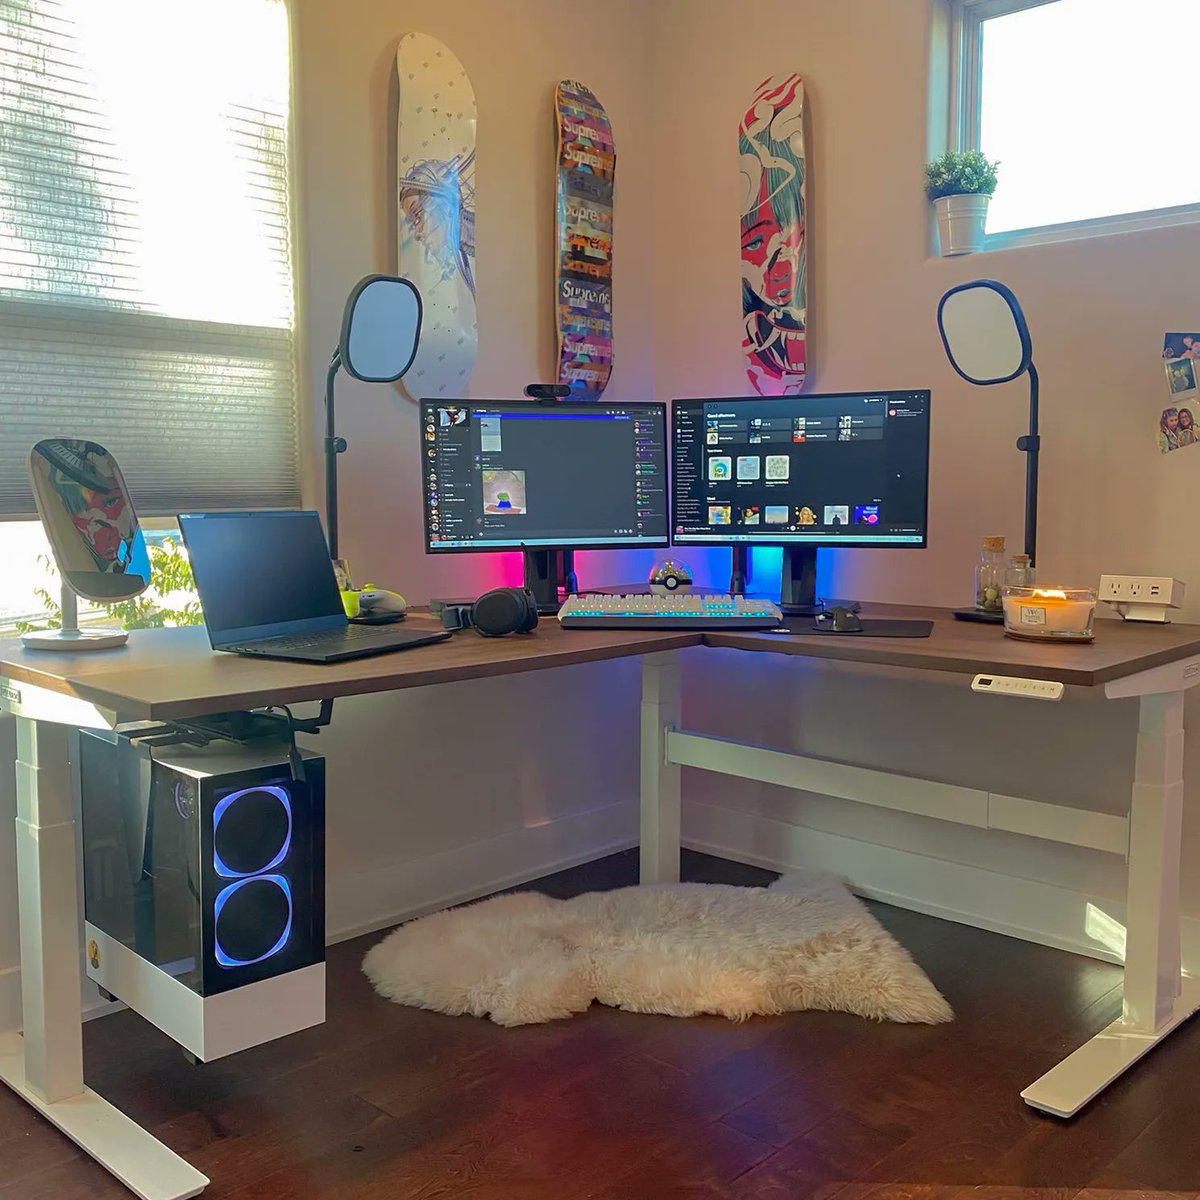 We're absolutely obsessed with this L-Shaped desk setup from @Peachjars! Thanks so much for sharing these photos, Peach! buff.ly/2RURwcn